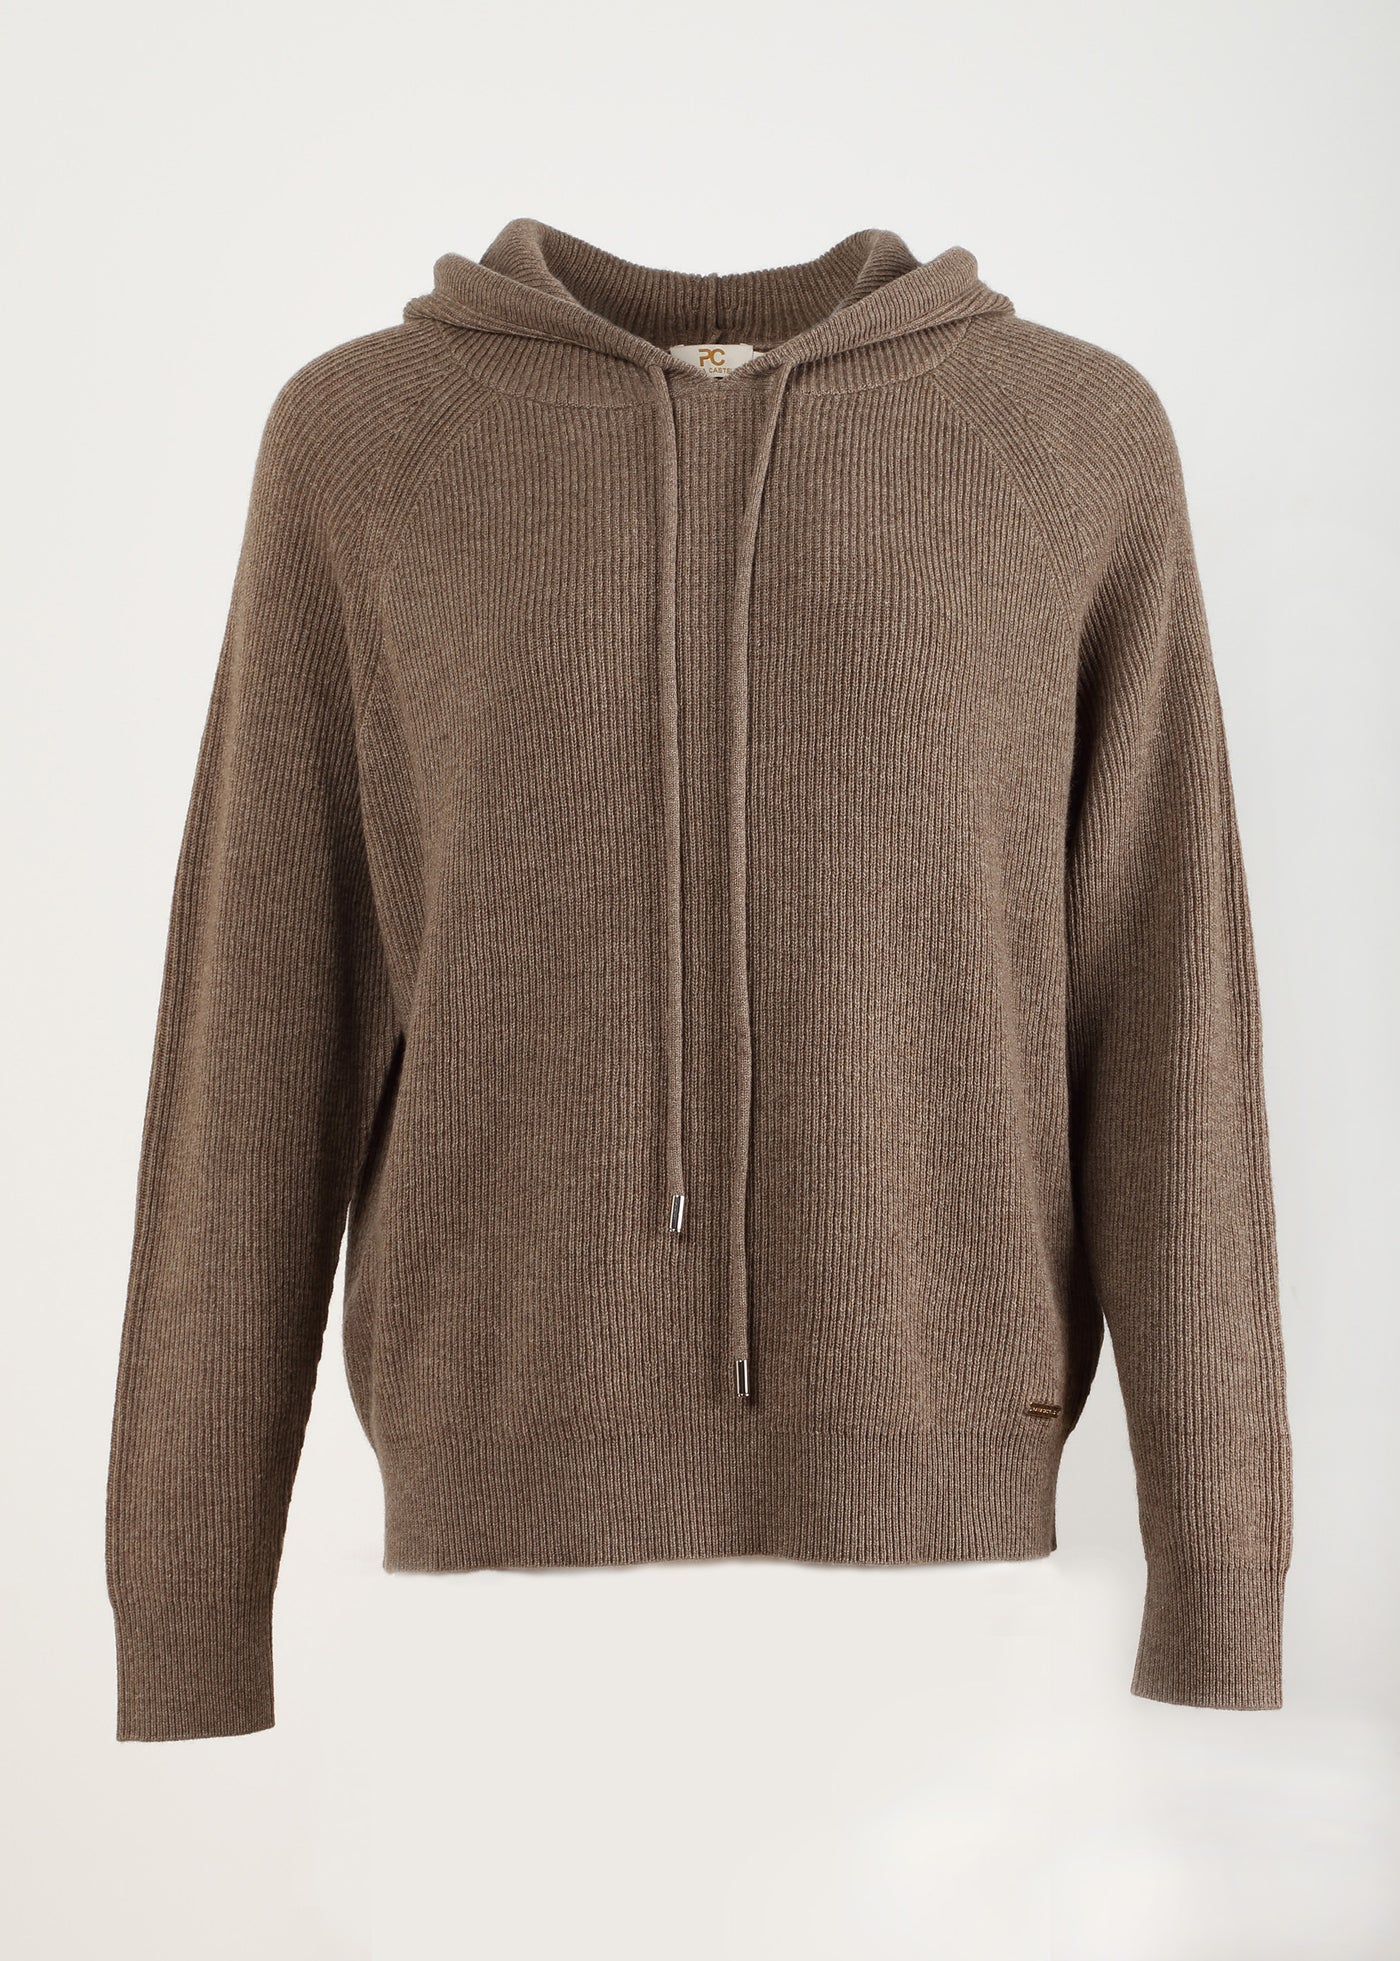 Women's Cashmere Hooded Pullover